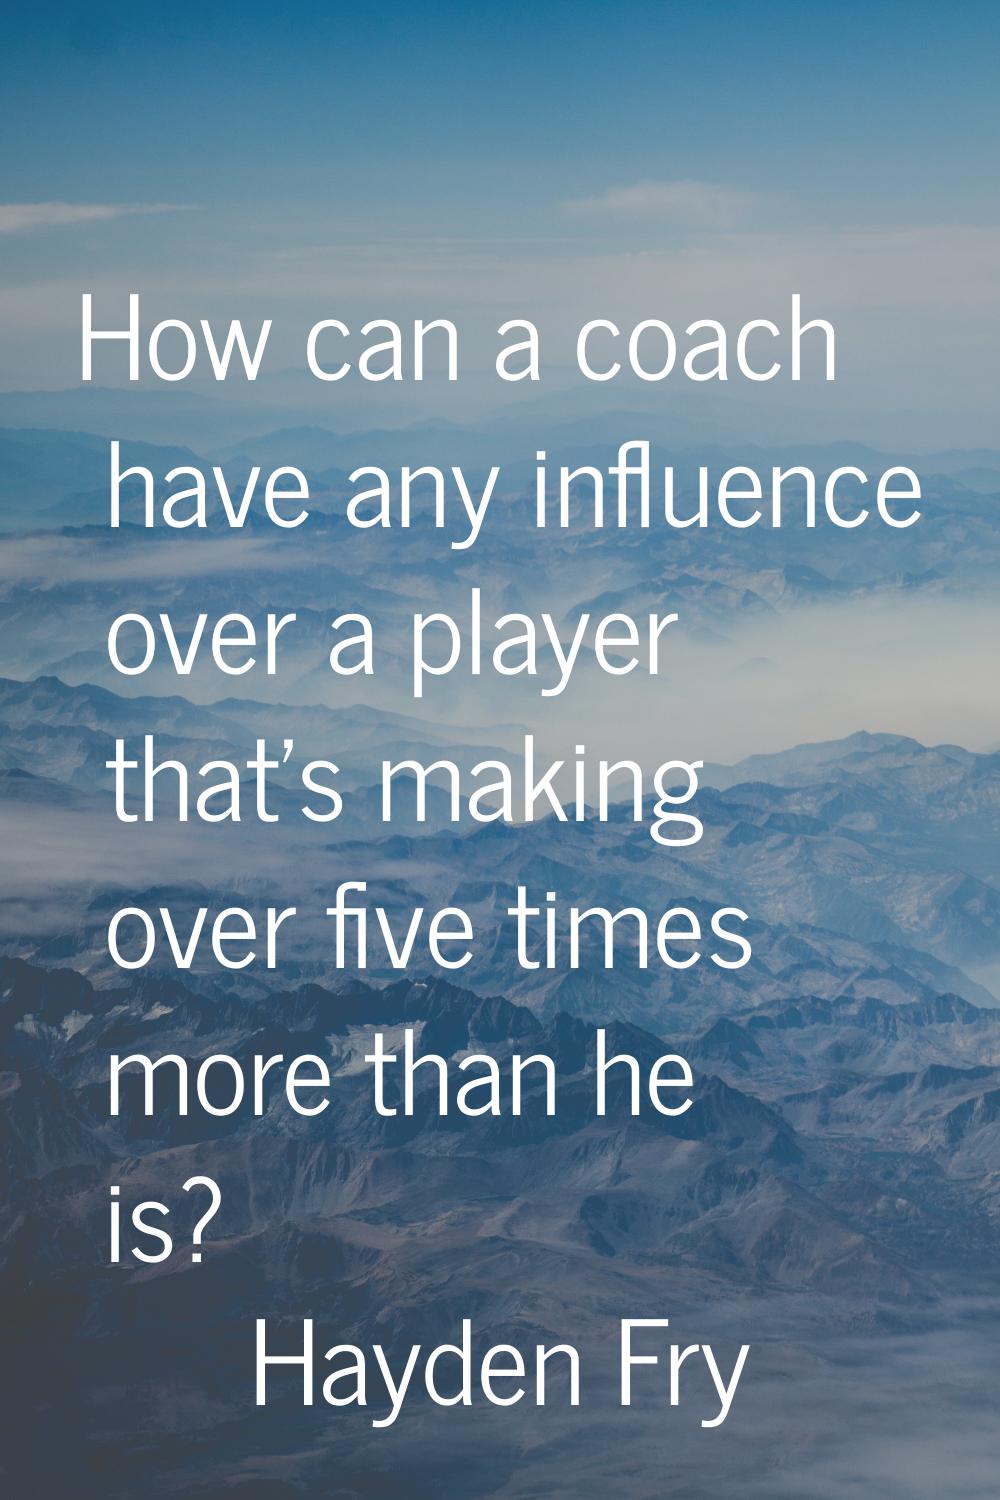 How can a coach have any influence over a player that's making over five times more than he is?